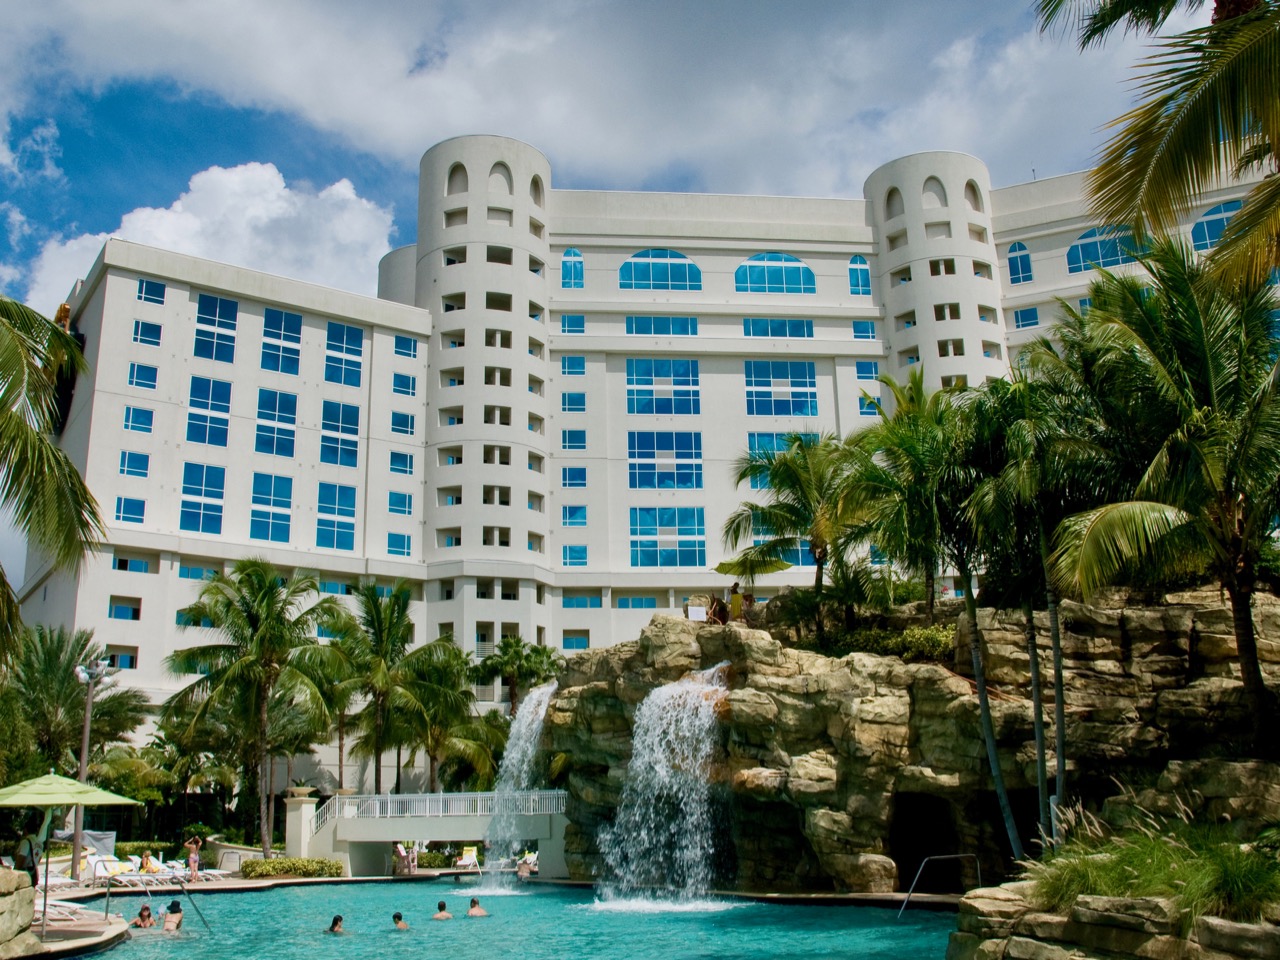 Seminole Tribe spends more than $24 million on gaming initiative